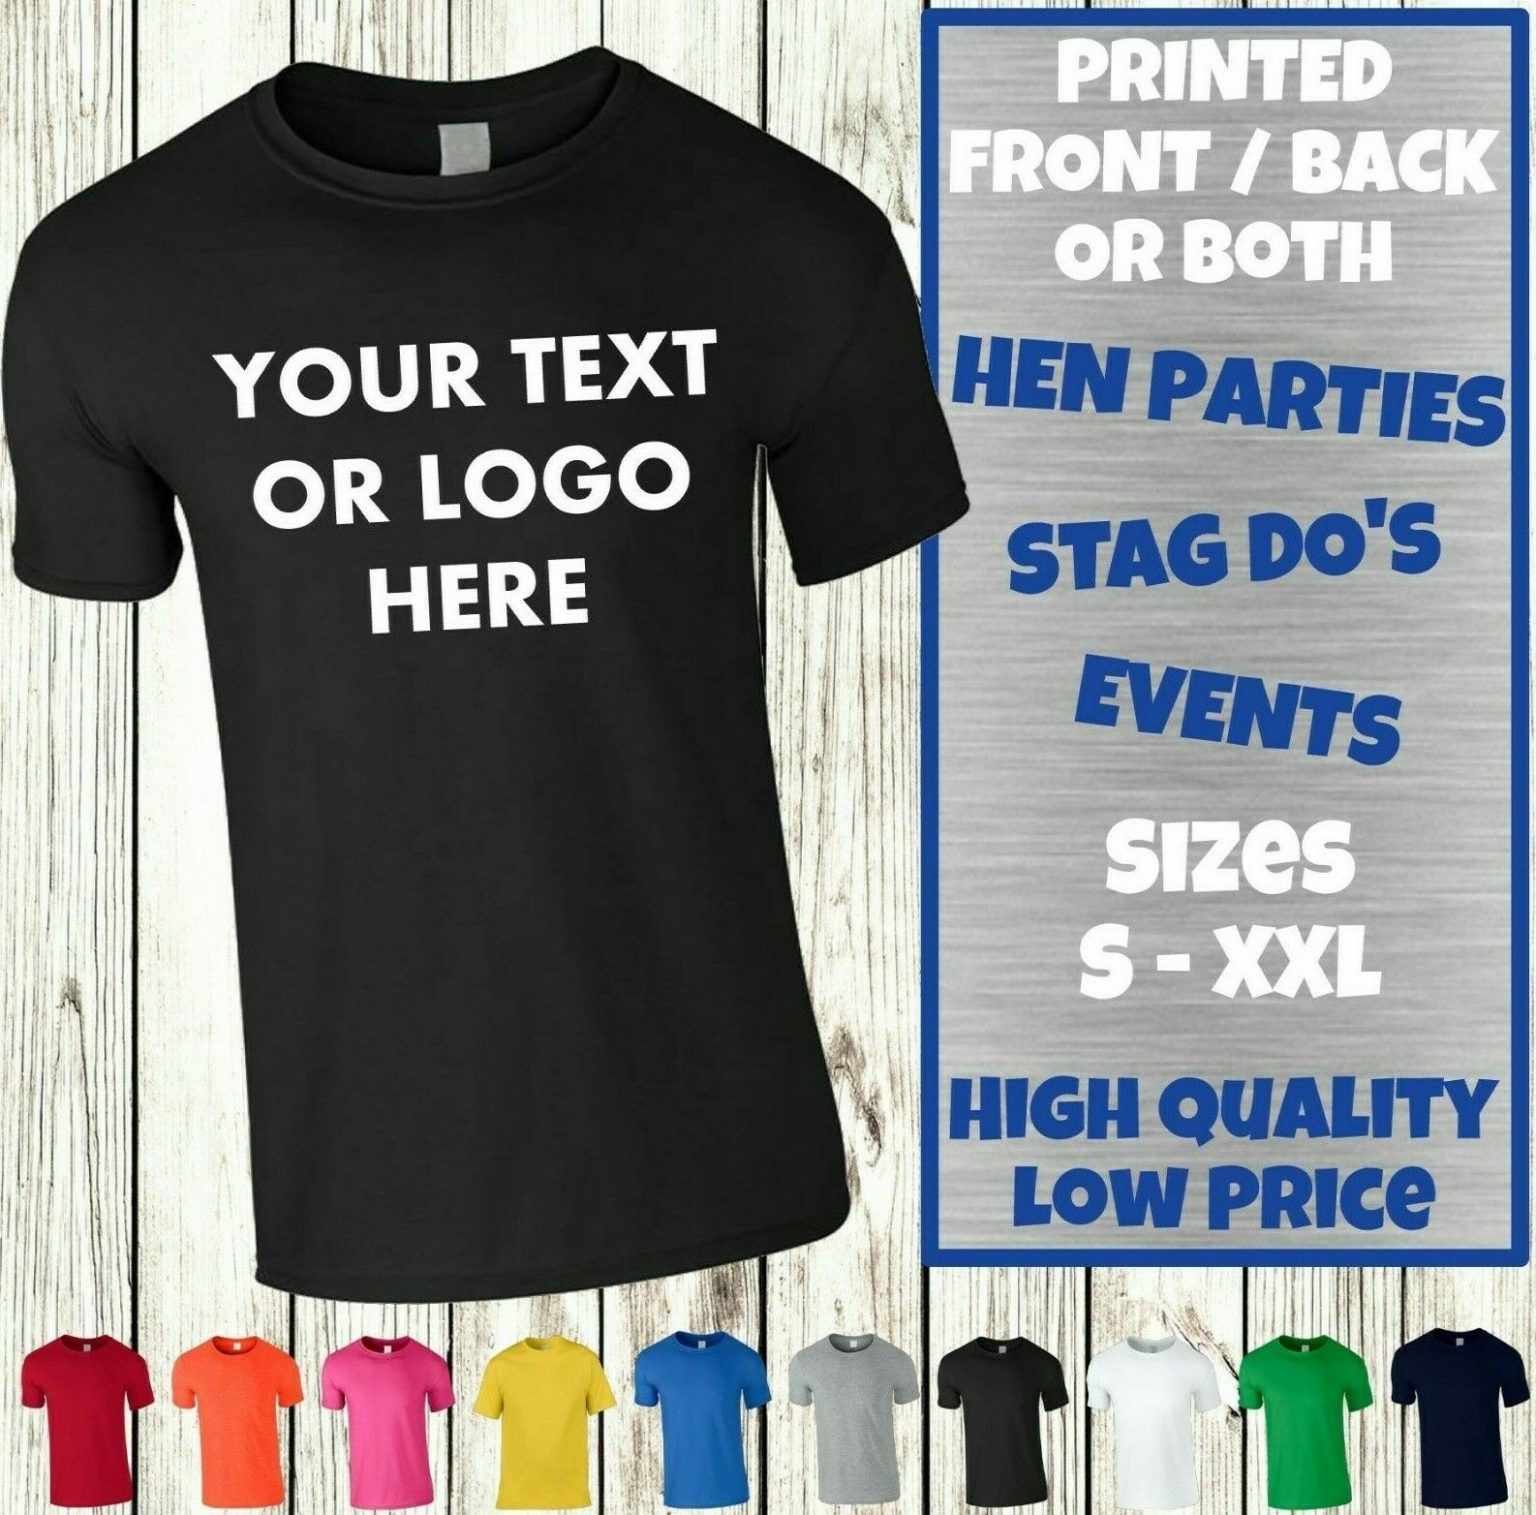 Cheap T shirt printing with next day delivery UK | From 99p